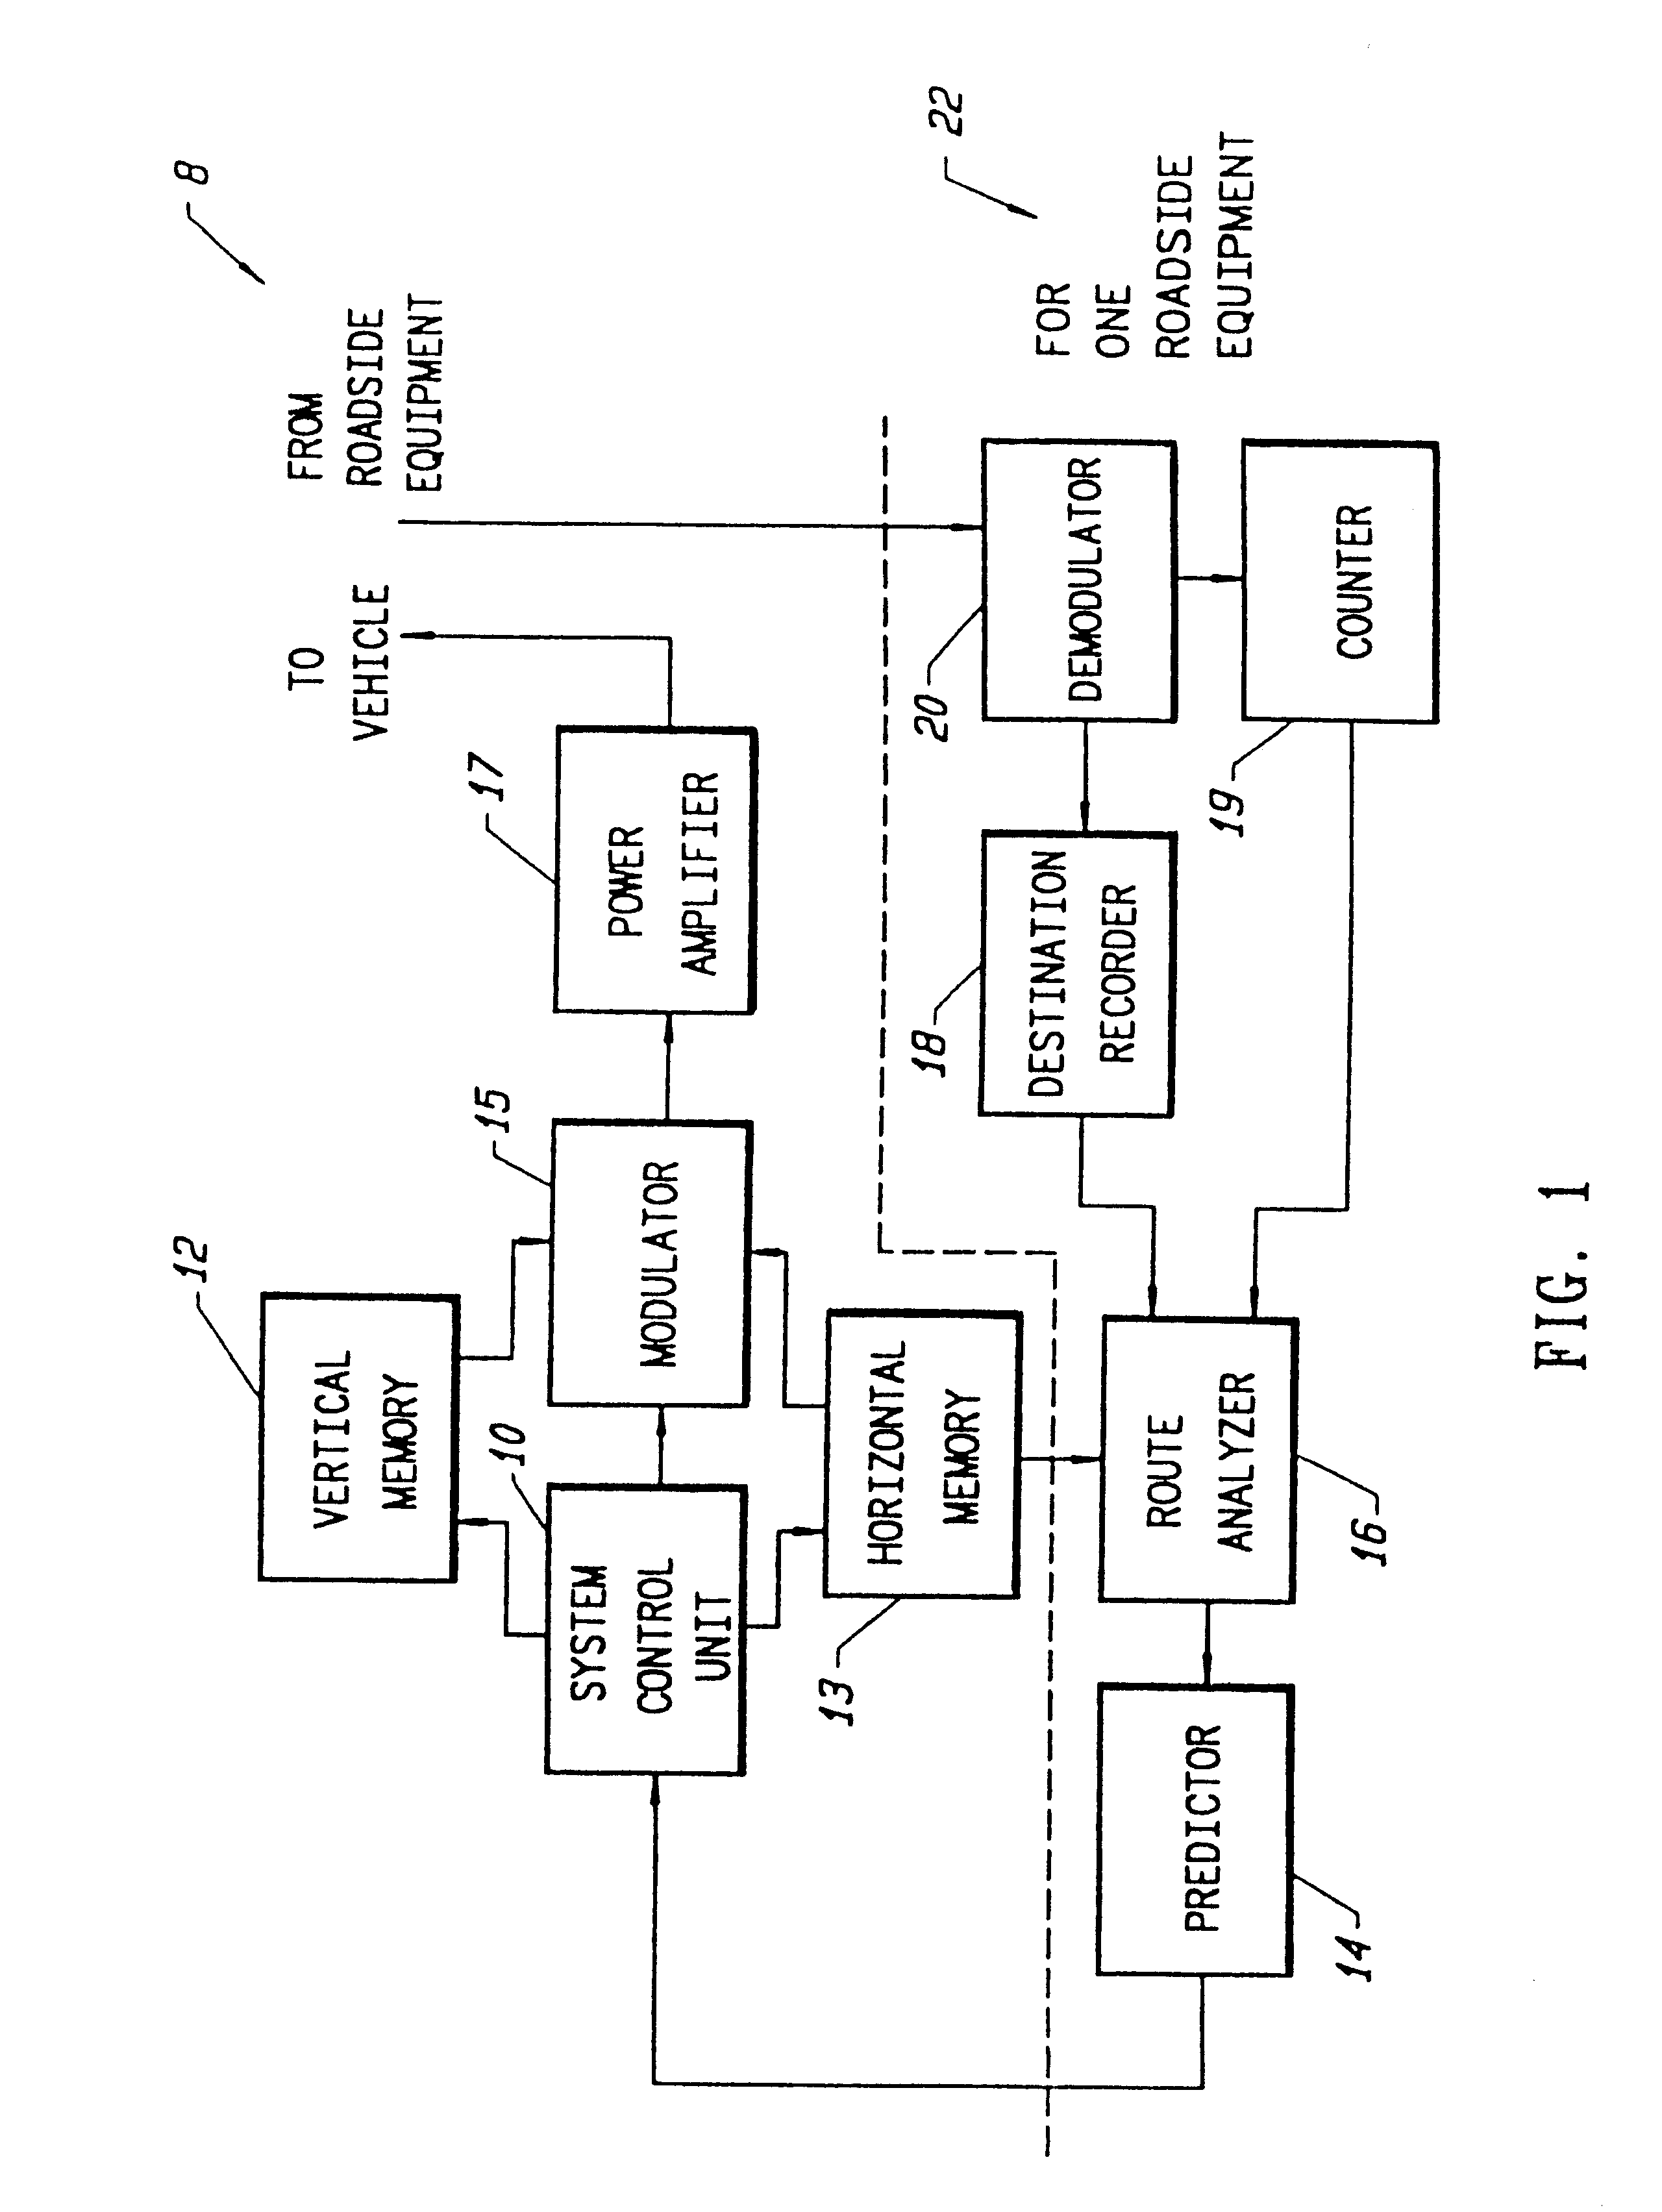 Vehicle guidance system and method therefor